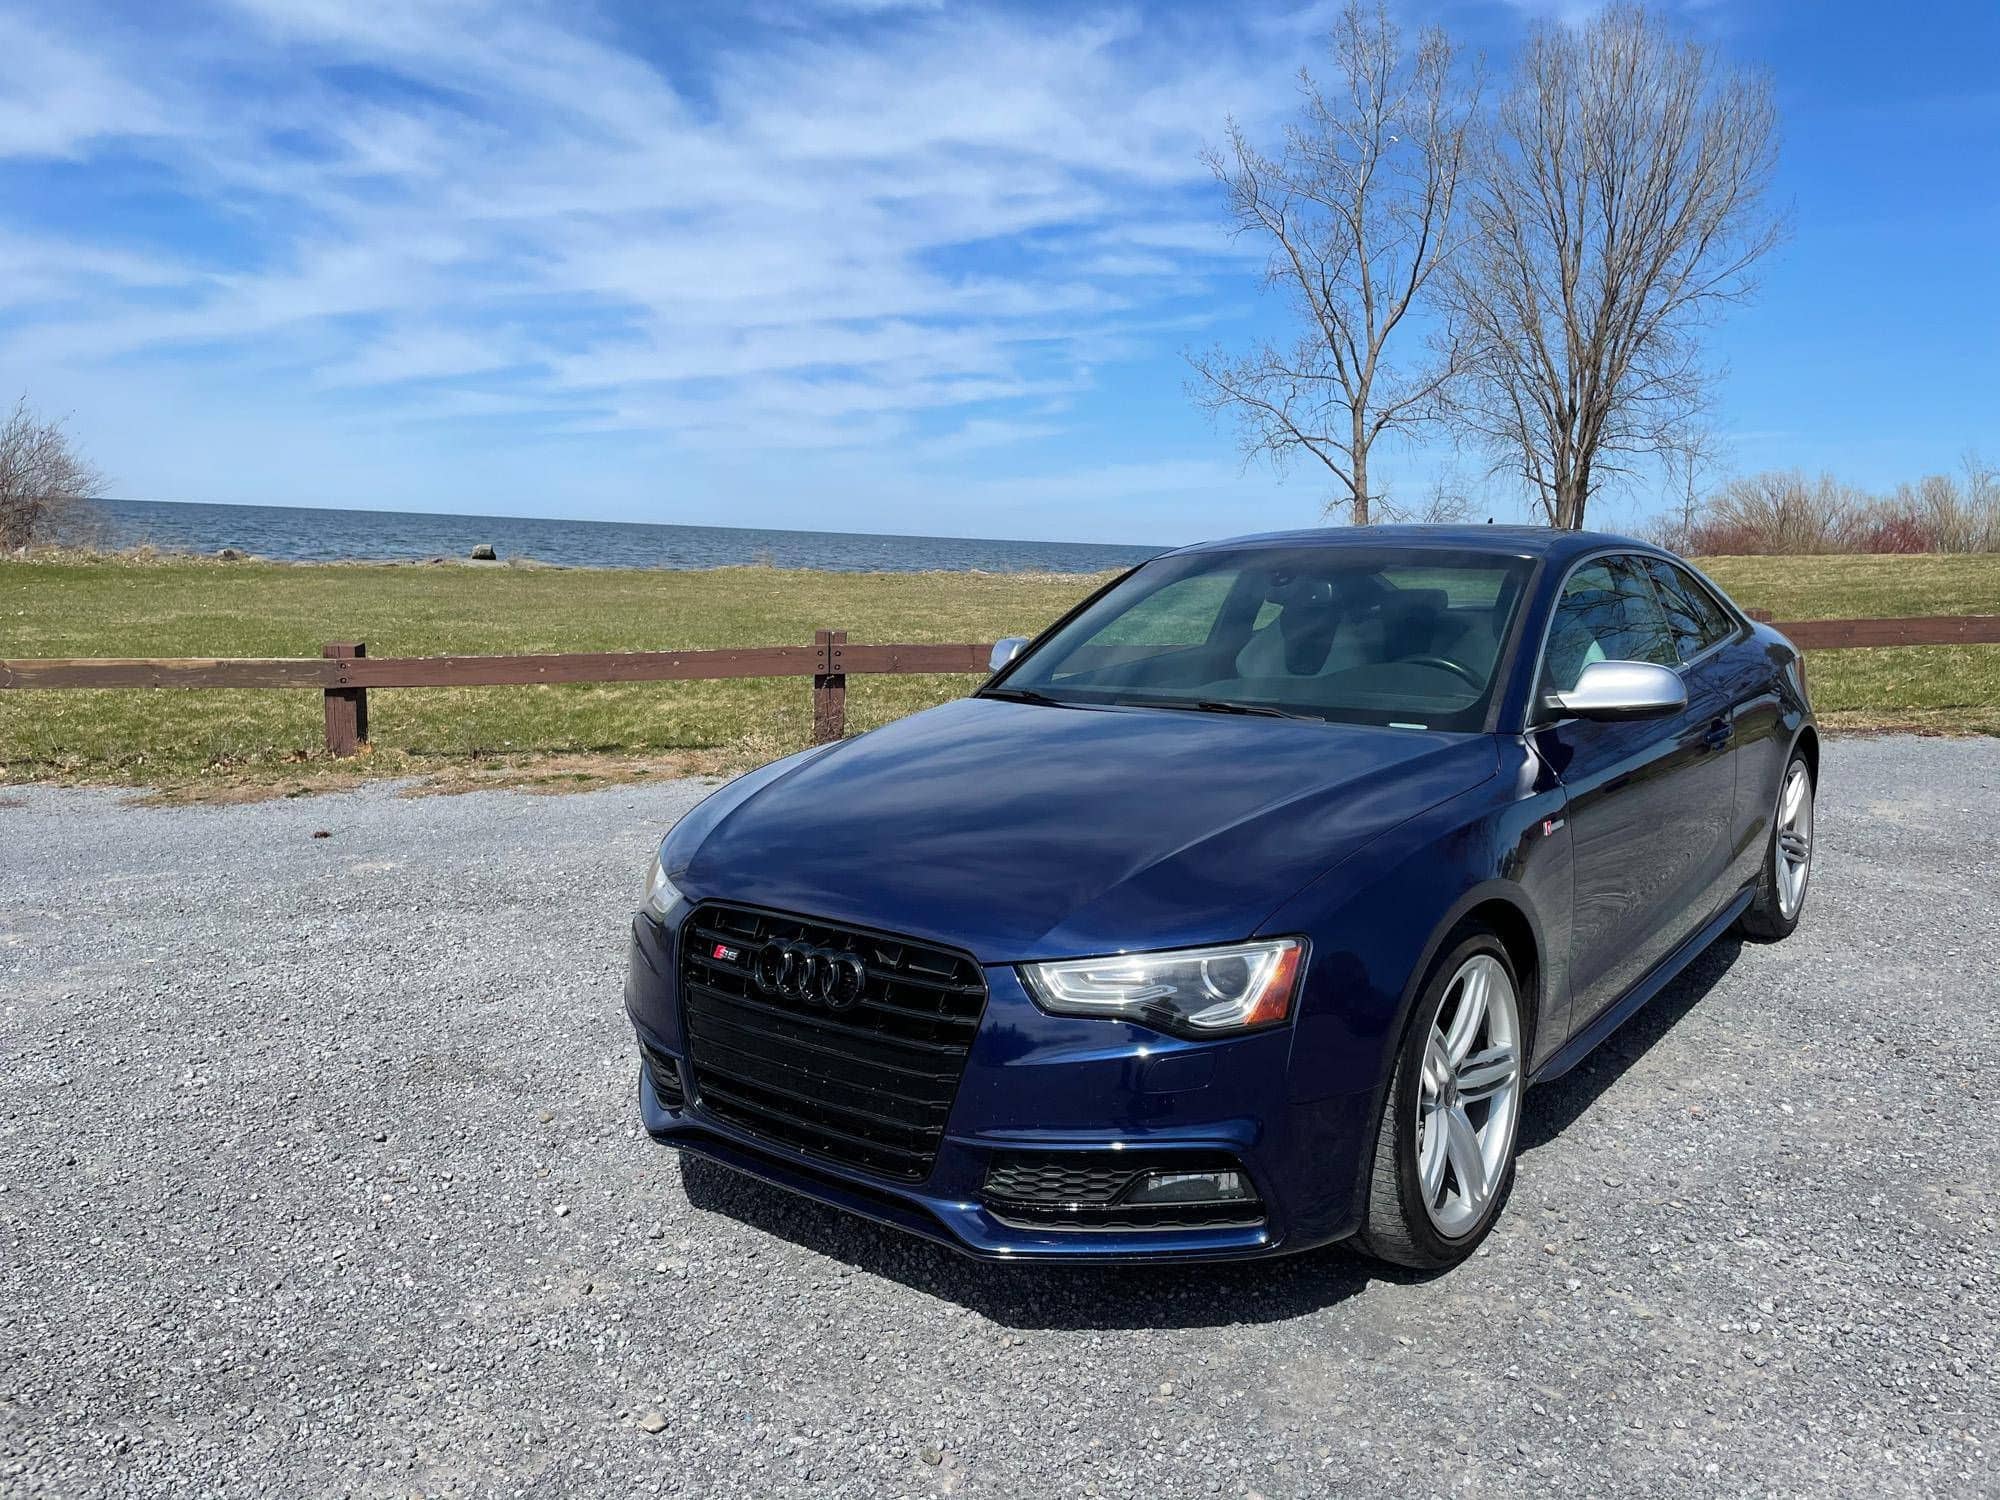 2013 Audi S5 - Blue 2013 S5 manual, sport diff, B&O, in NY - Used - VIN WAUGGAFR1DA015822 - 63,000 Miles - 6 cyl - AWD - Manual - Coupe - Blue - Richland, NY 13144, United States